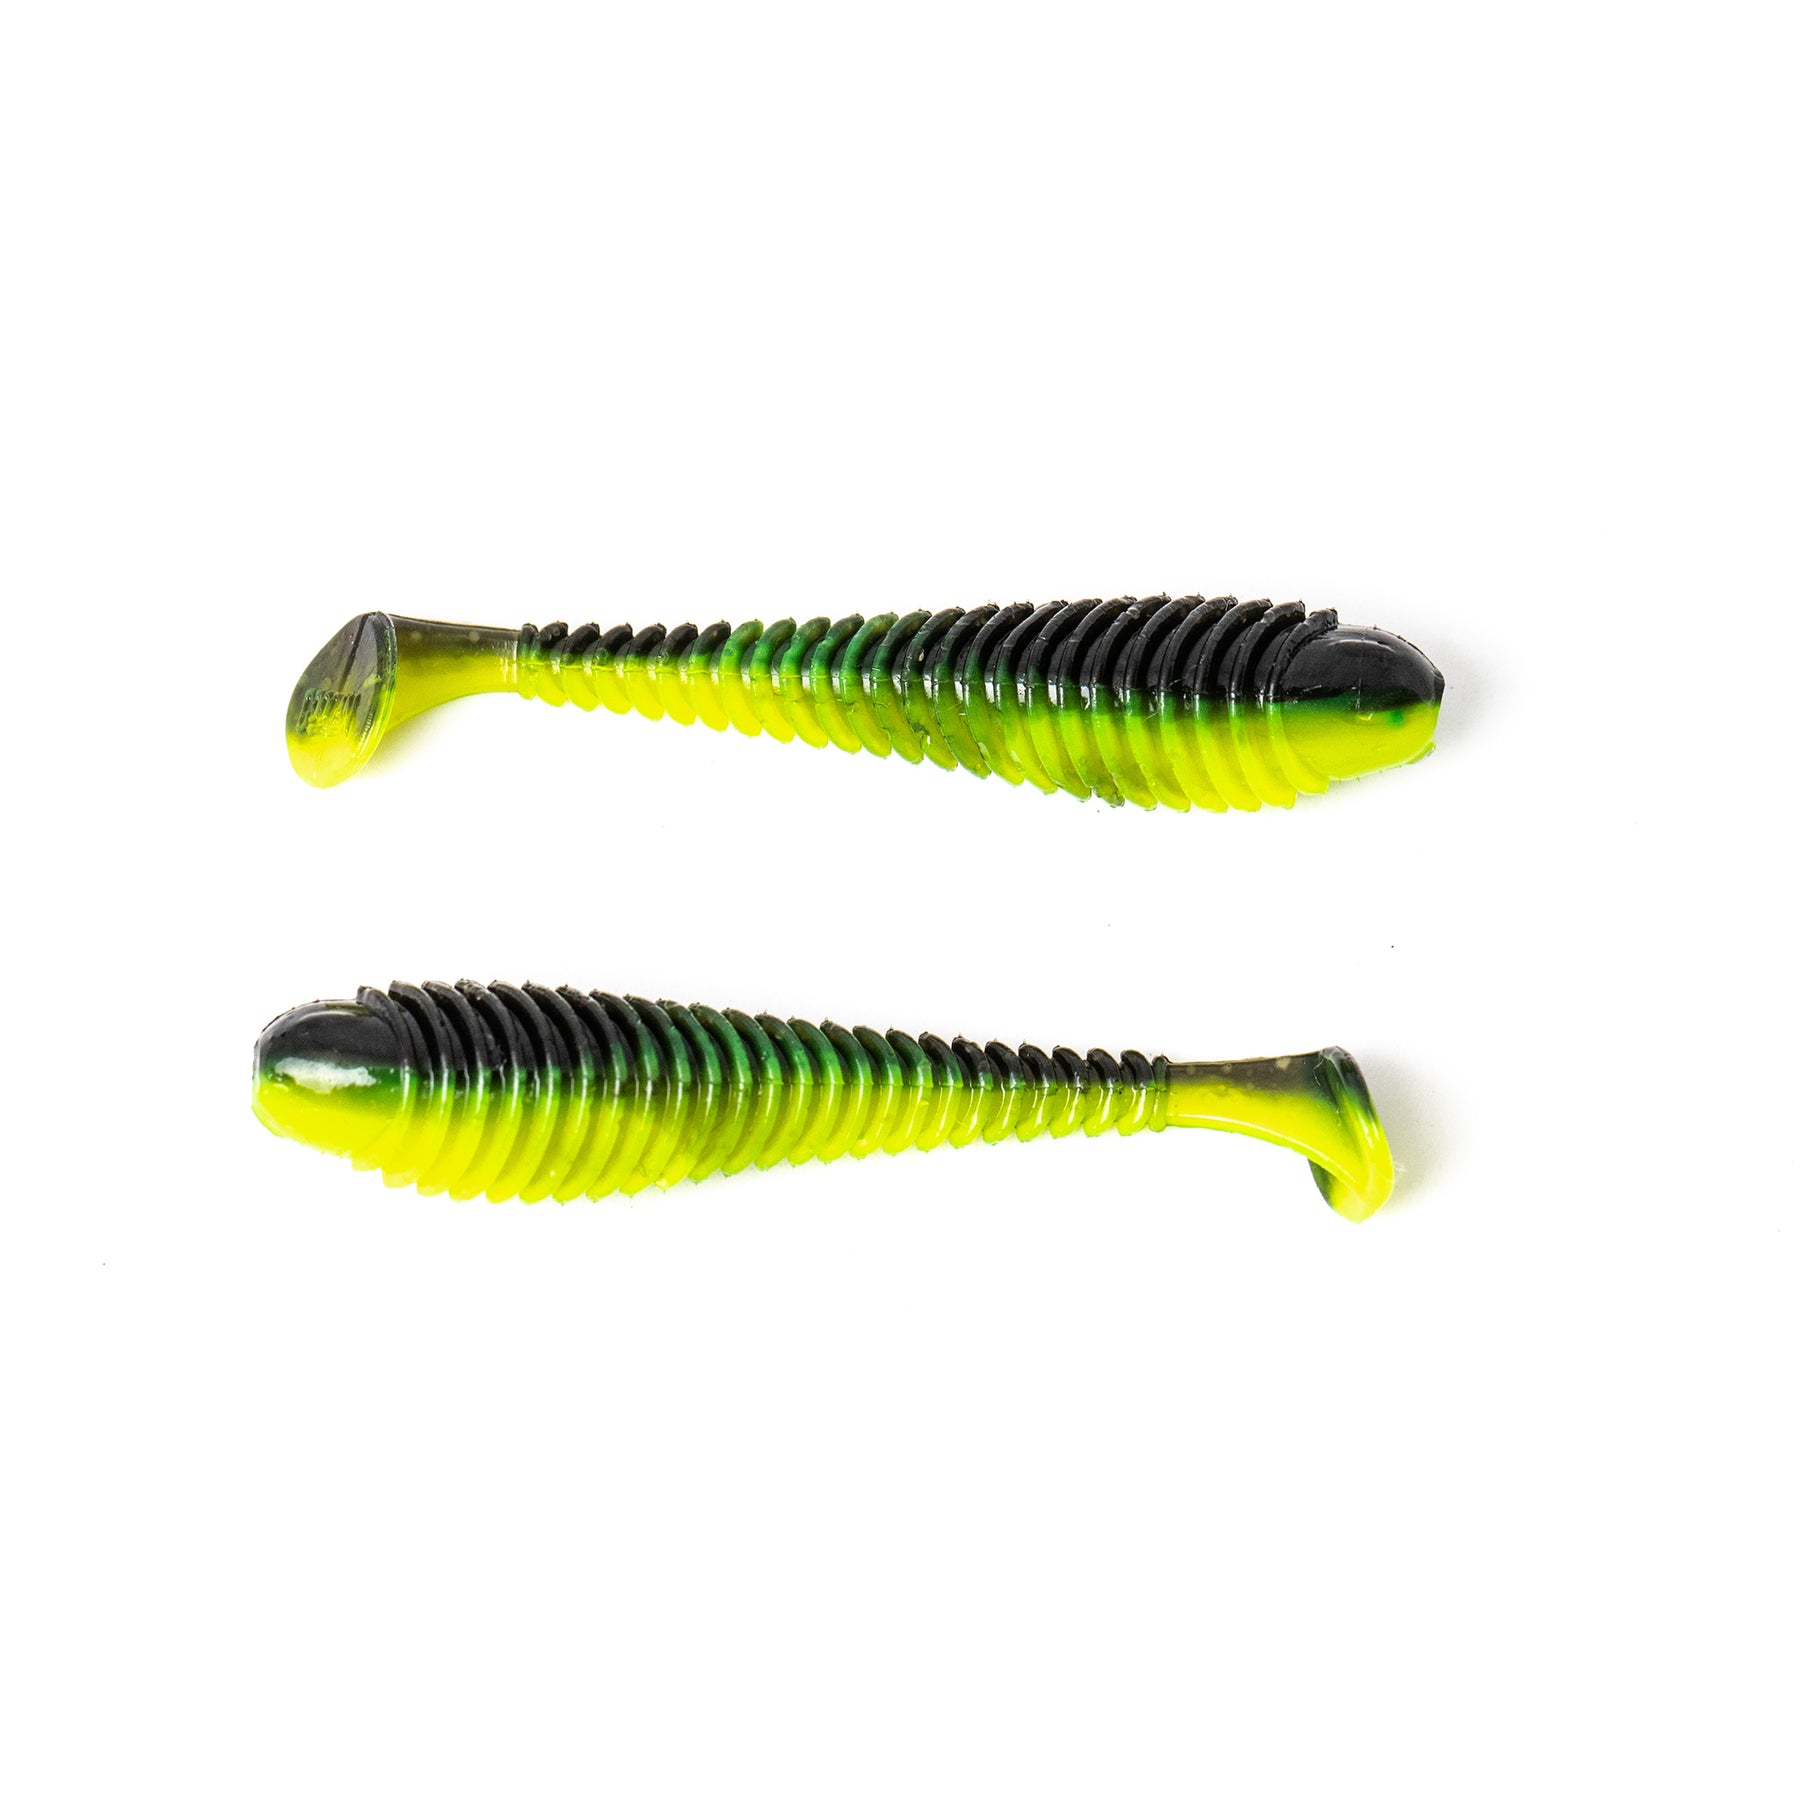 (3) Googan Saucy Swimmer 3.8'' Paddle Tail Swimbait - Like Keitech (Pick  Color)